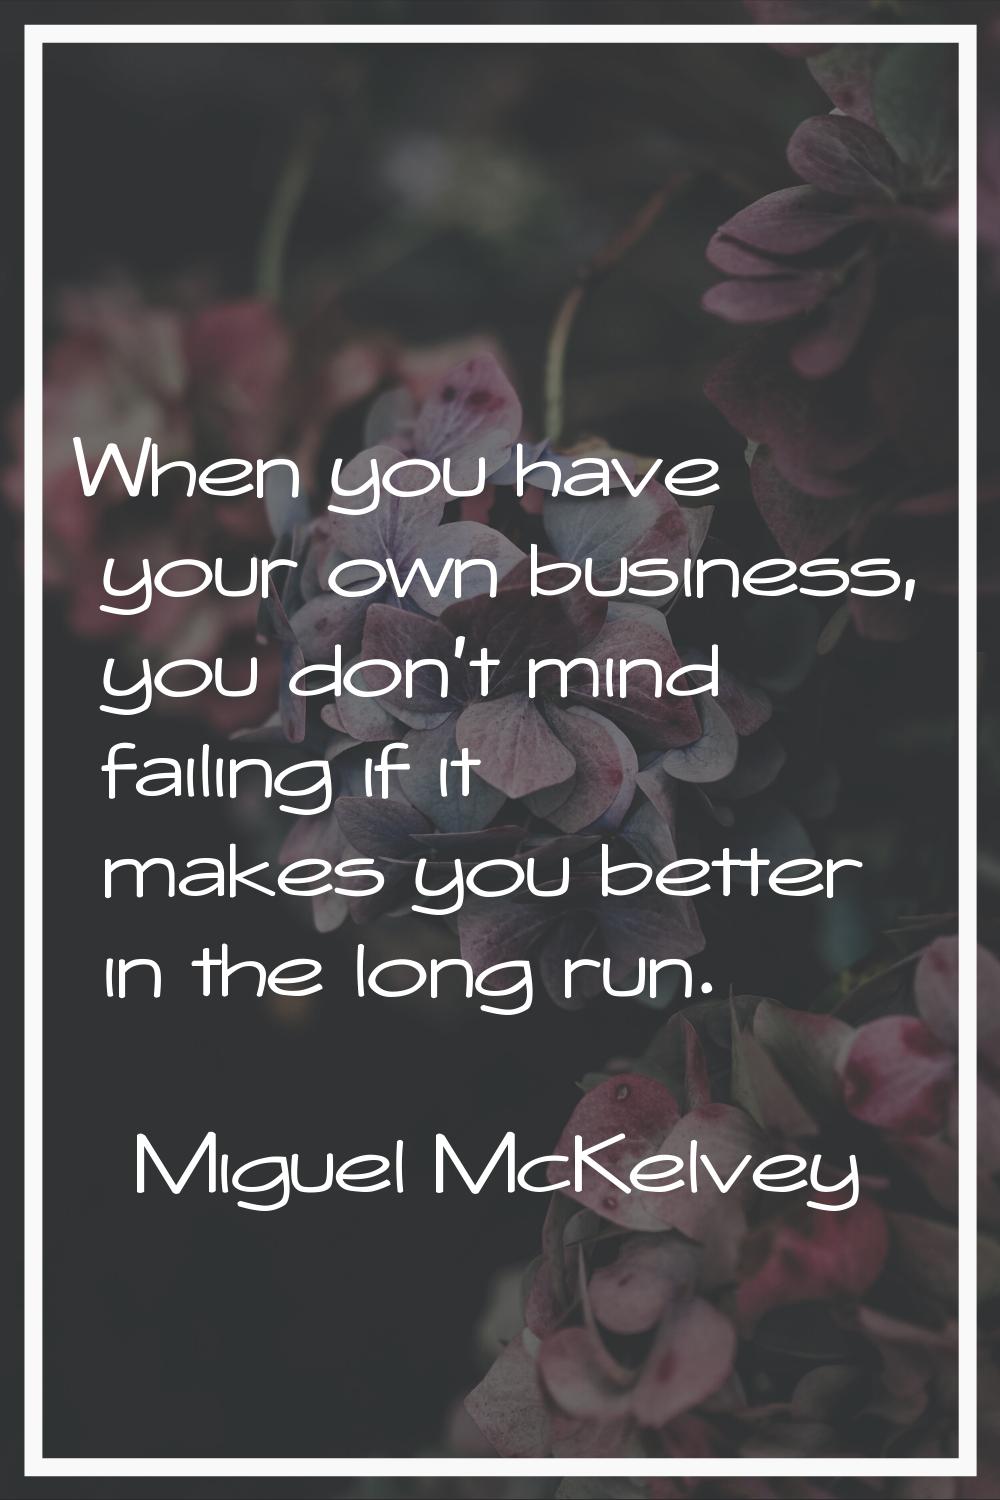 When you have your own business, you don't mind failing if it makes you better in the long run.